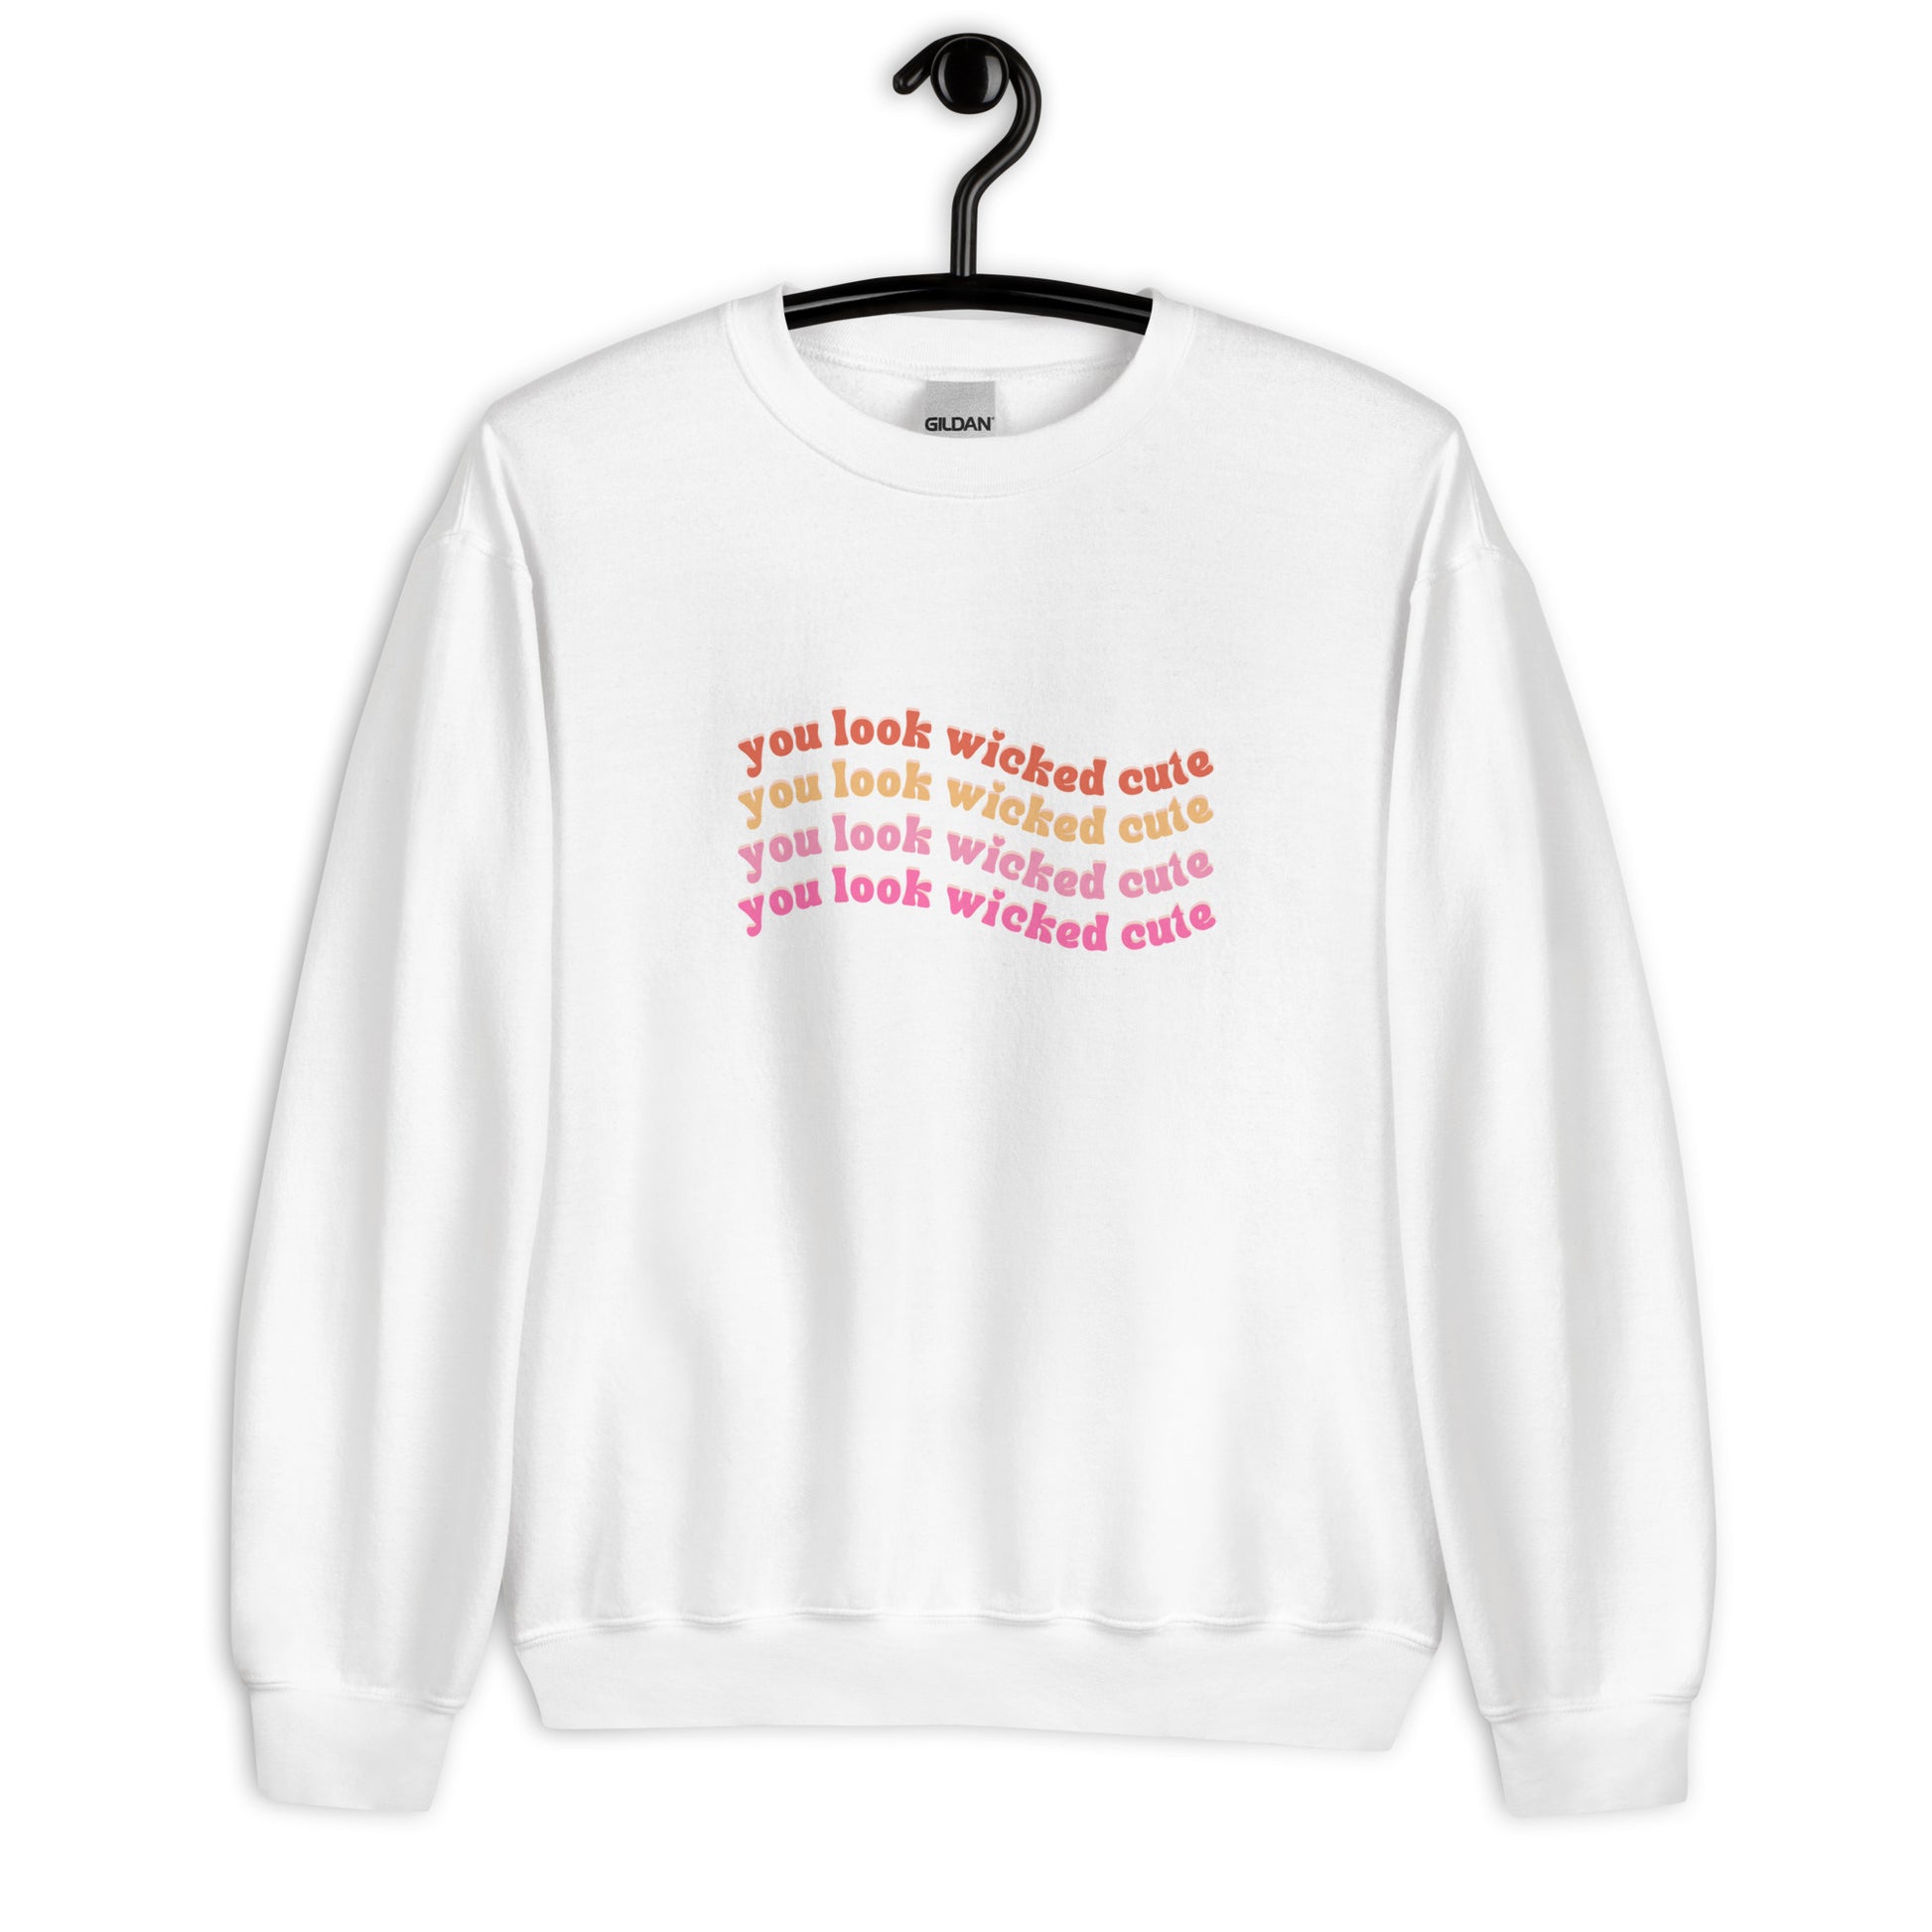 white crewneck that says "you look wicked cute" in red pink and orange lettering